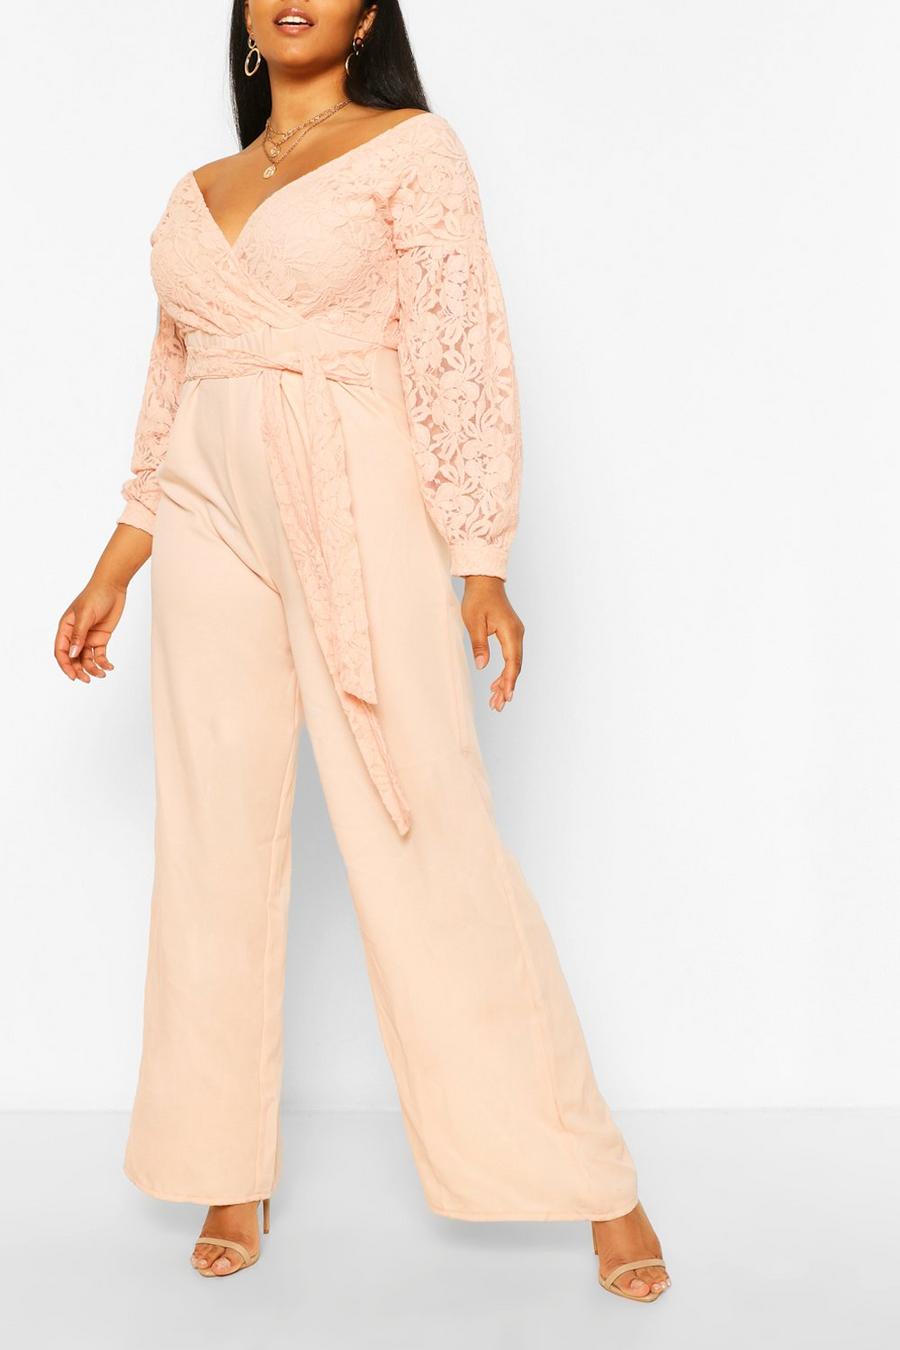 ophouden Skim melodie Plus Lace Off The Shoulder Wide Leg Jumpsuit | boohoo